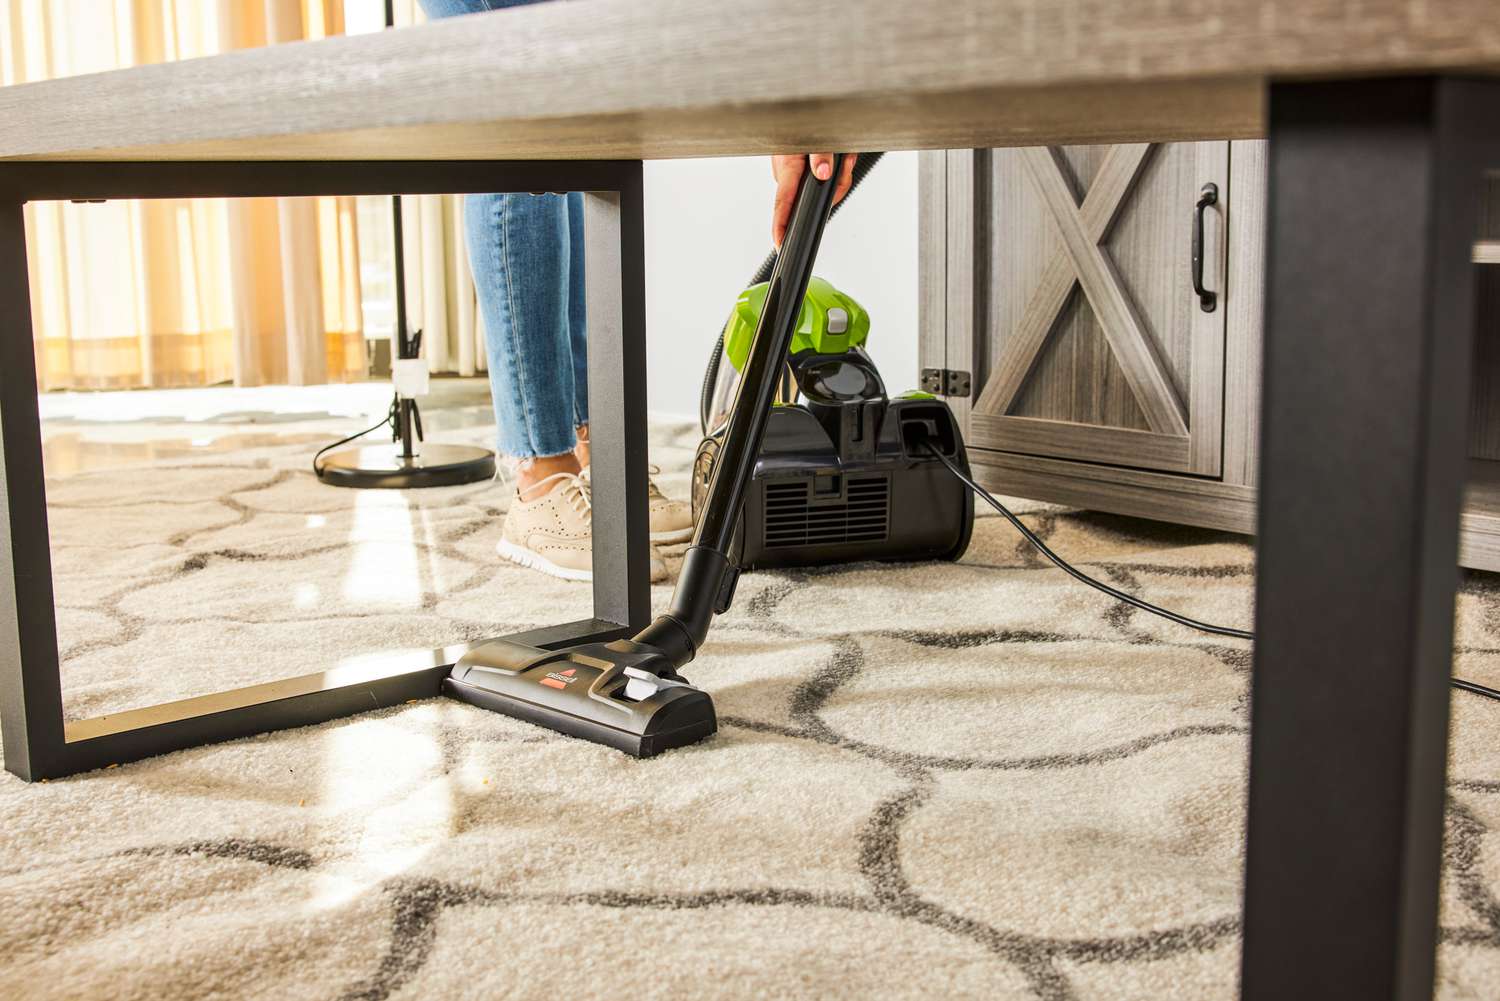 A person uses the Bissell Zing Bagless Canister Vacuum, 2156A on a carpet